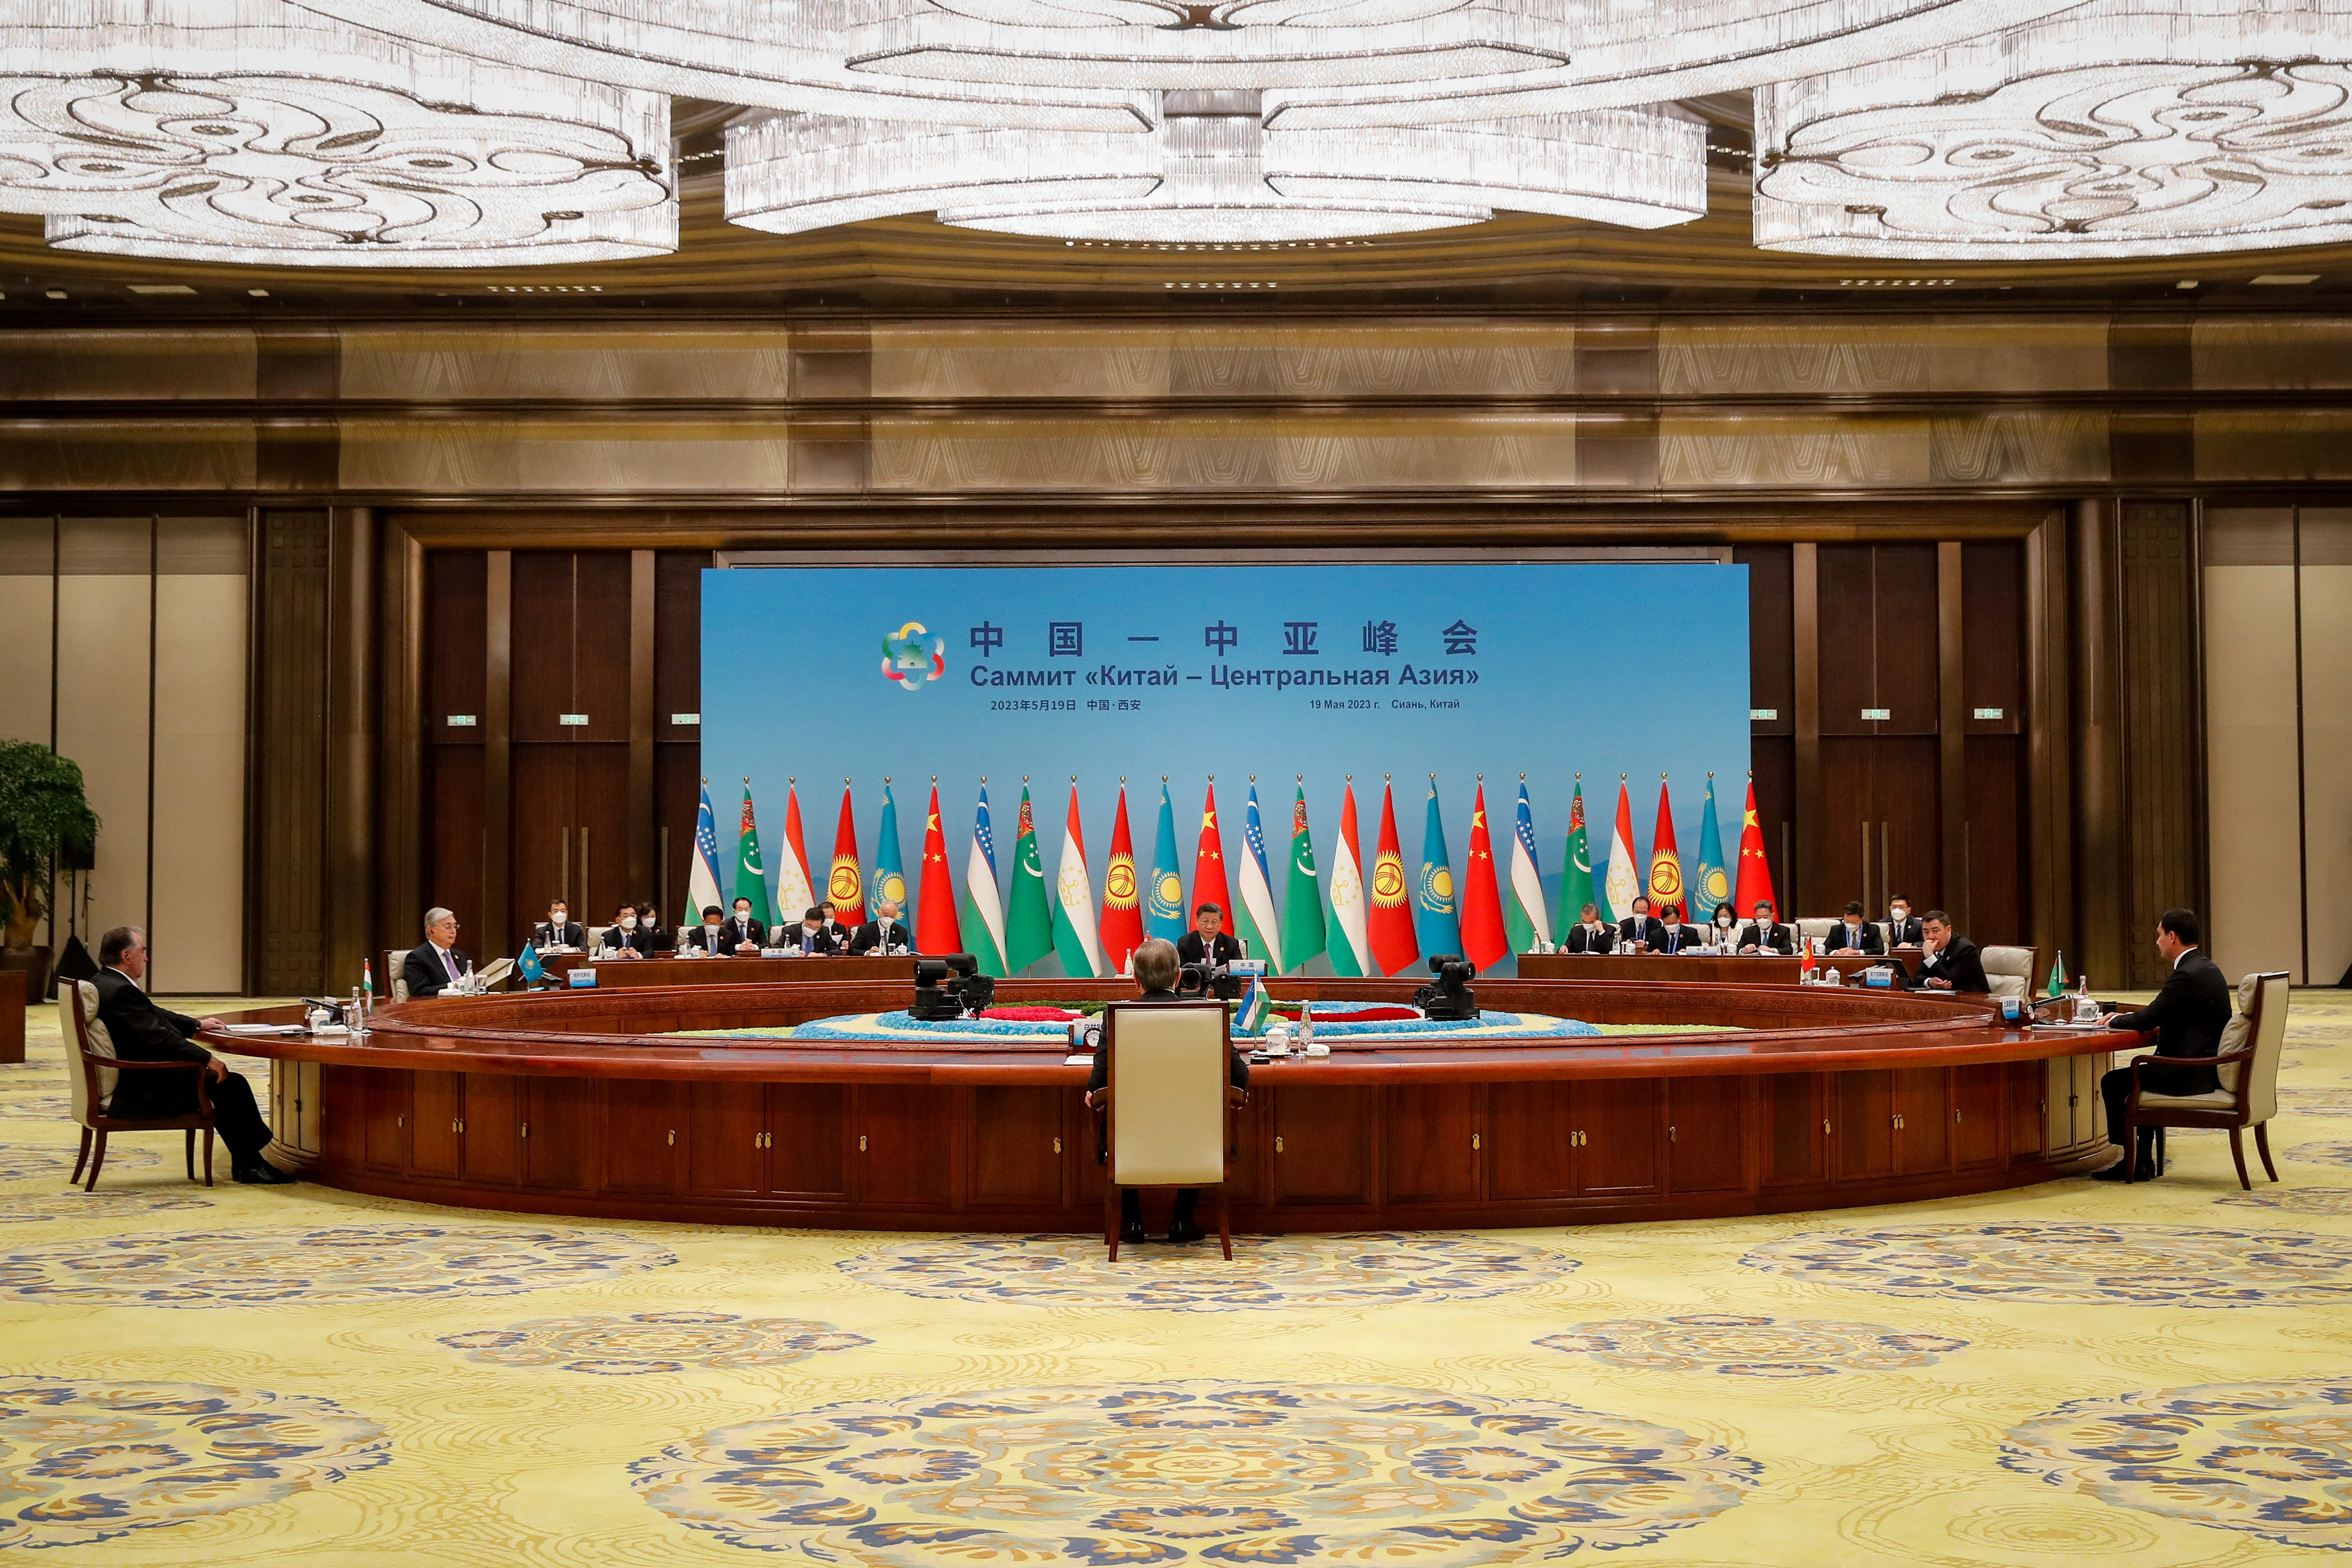 China-Central Asia Summit in Xian